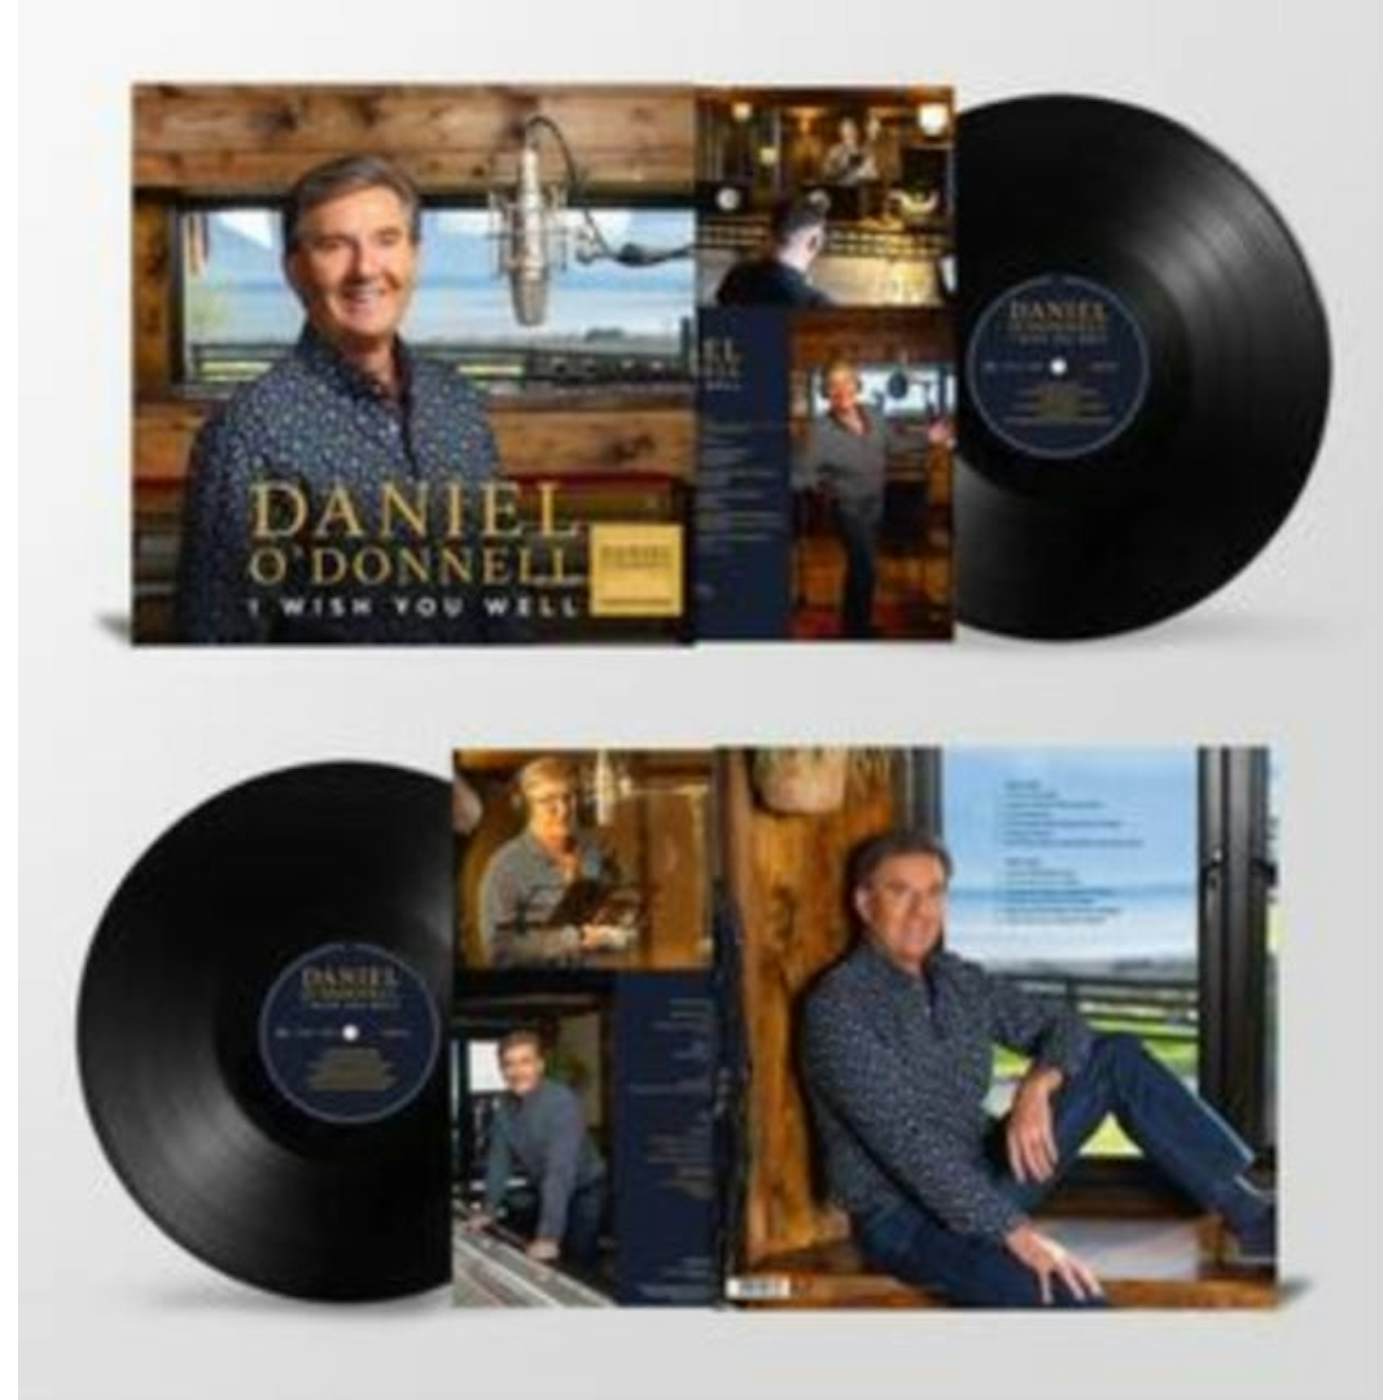  Daniel O'Donnell  LP - I Wish You Well (Vinyl)